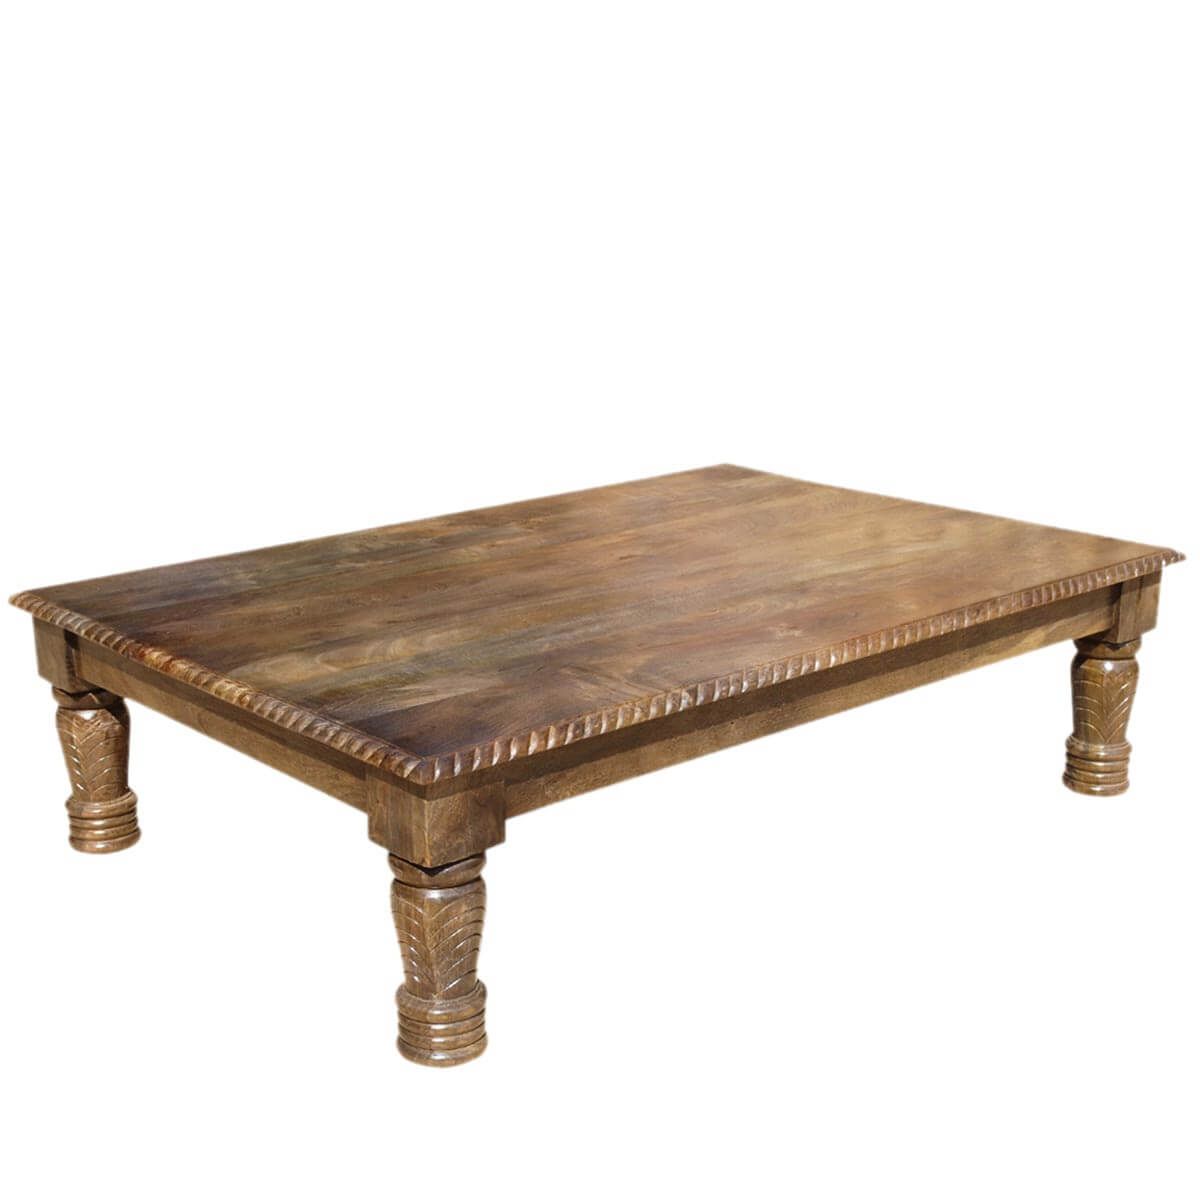 Solid Wood Hand Carved Transitional Lincoln Coffee Table Inside Wooden Hand Carved Coffee Tables (View 2 of 15)